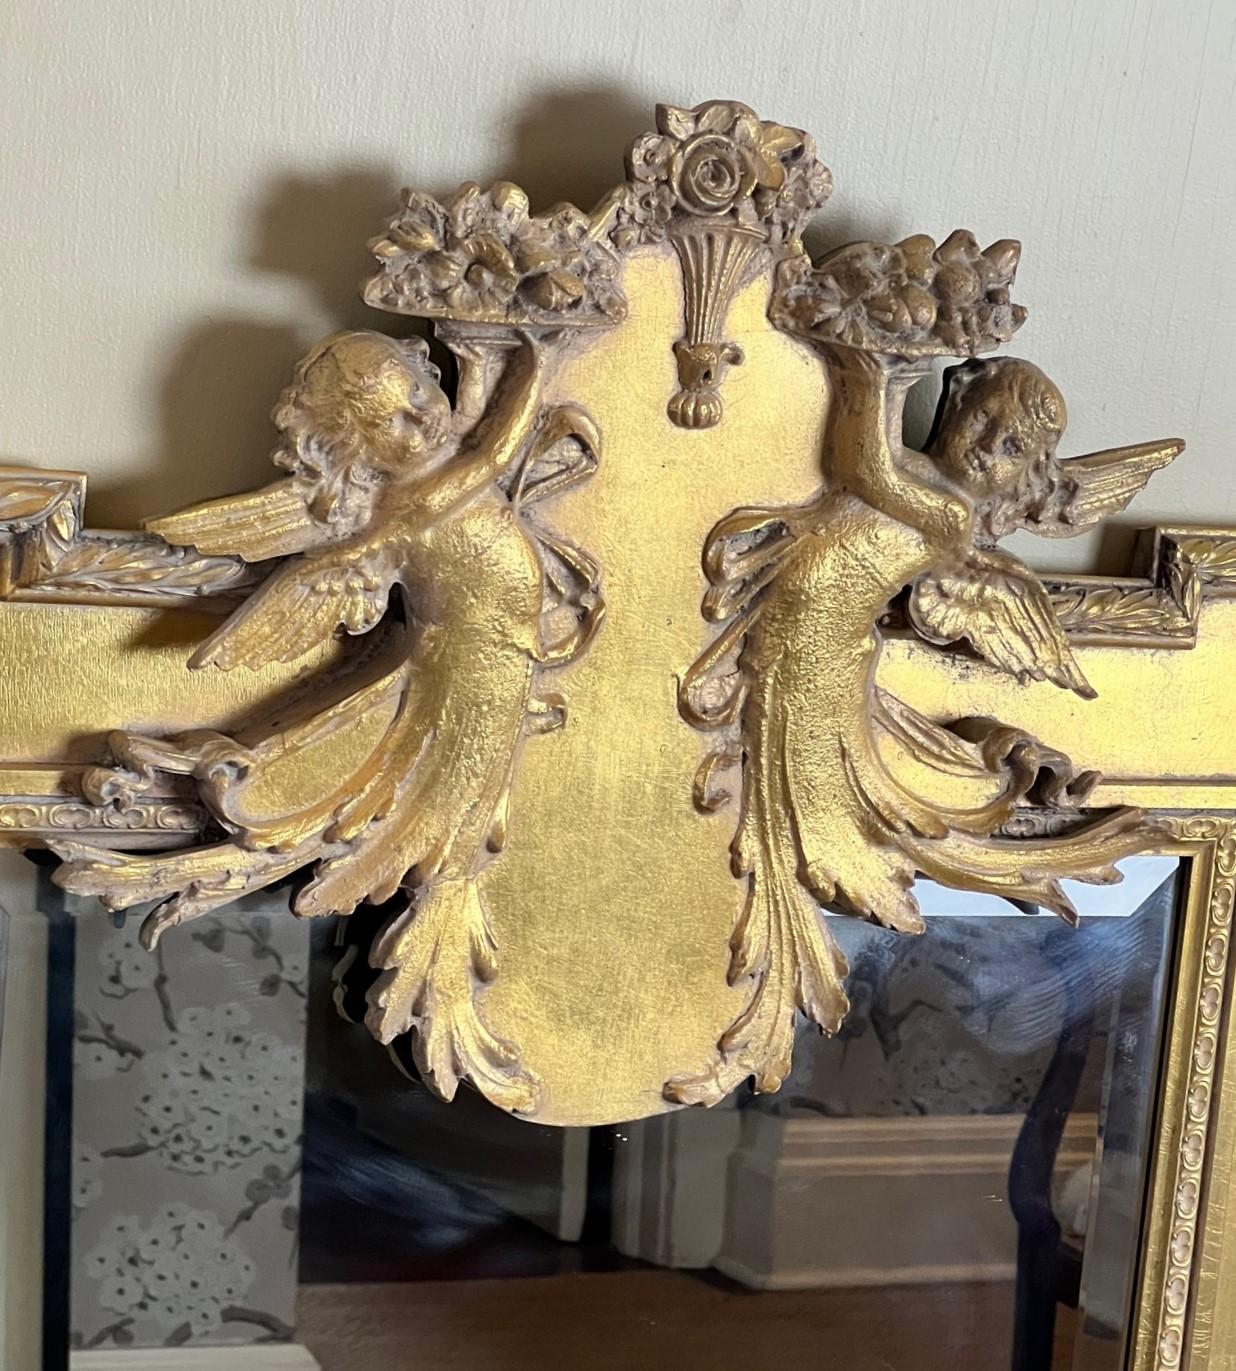 Beveled 20th C. Neoclassical Style Giltwood Mirror with Cherub and Floral Decoration For Sale